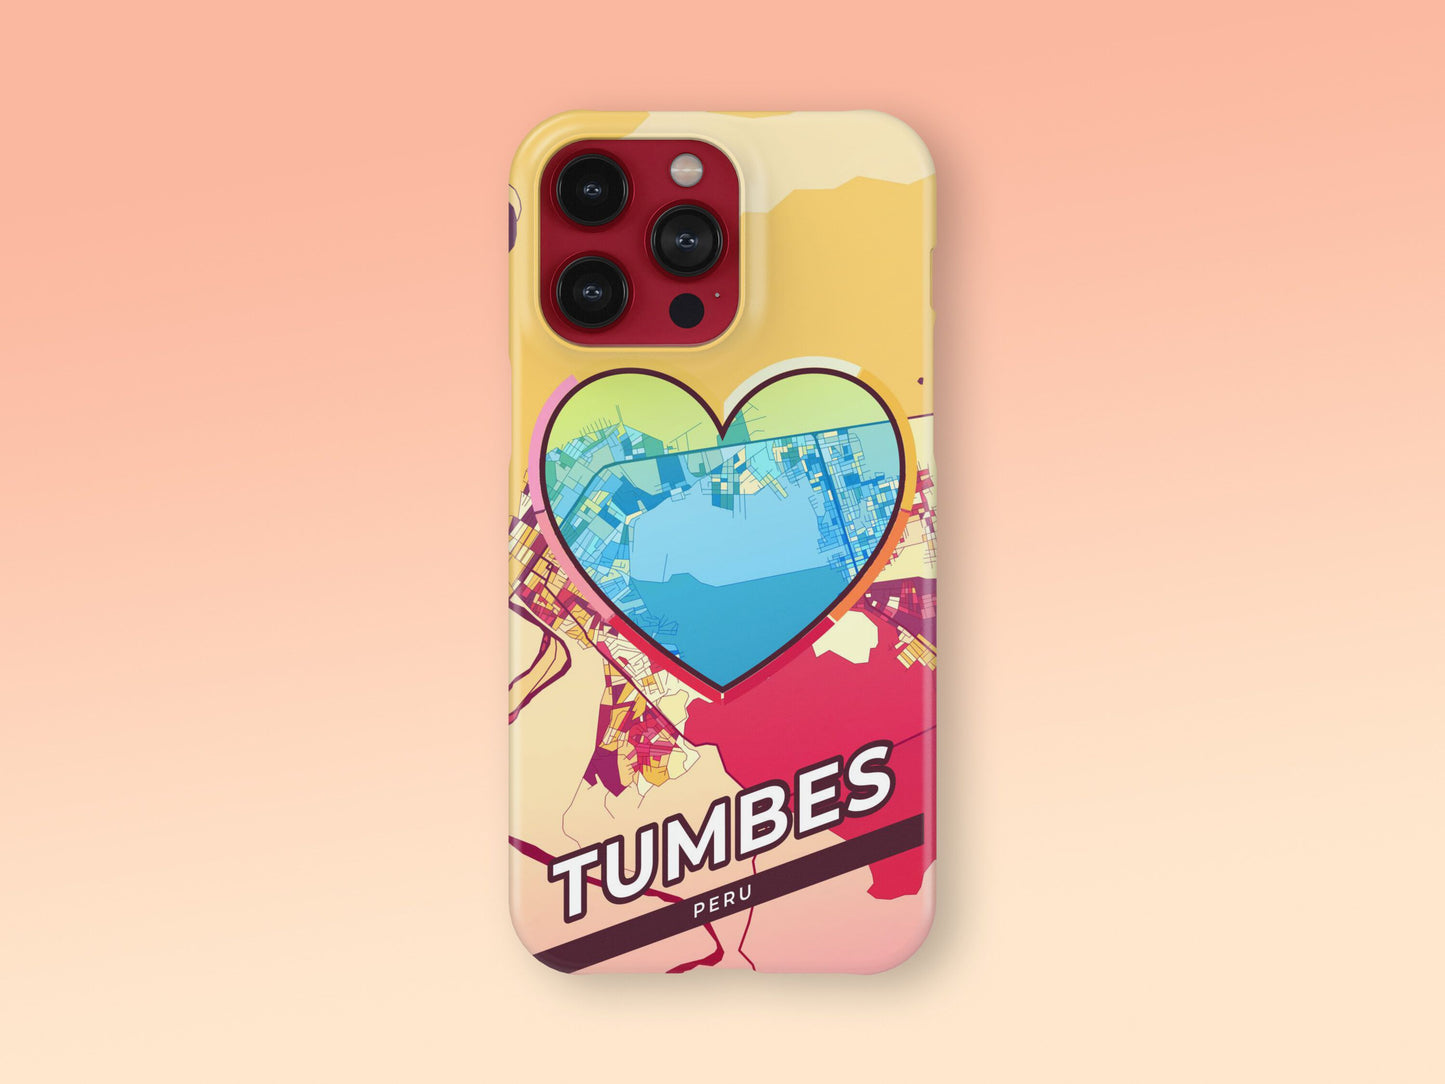 Tumbes Peru slim phone case with colorful icon. Birthday, wedding or housewarming gift. Couple match cases. 2